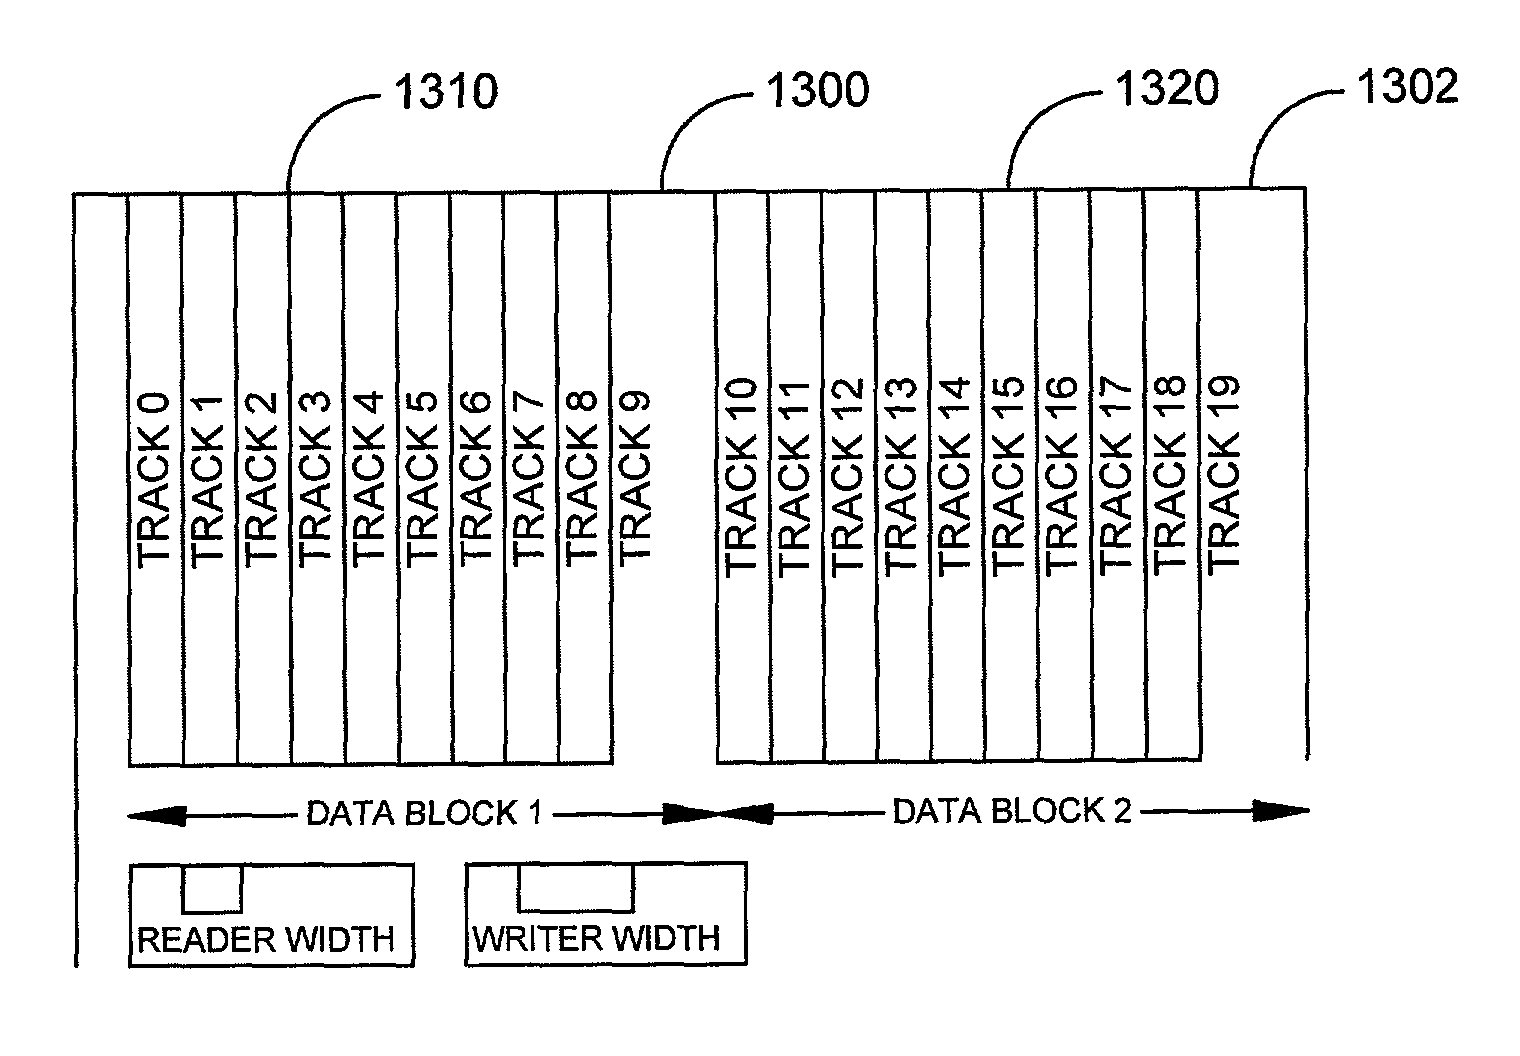 Method to achieve higher track density by allowing only one-sided track encroachment